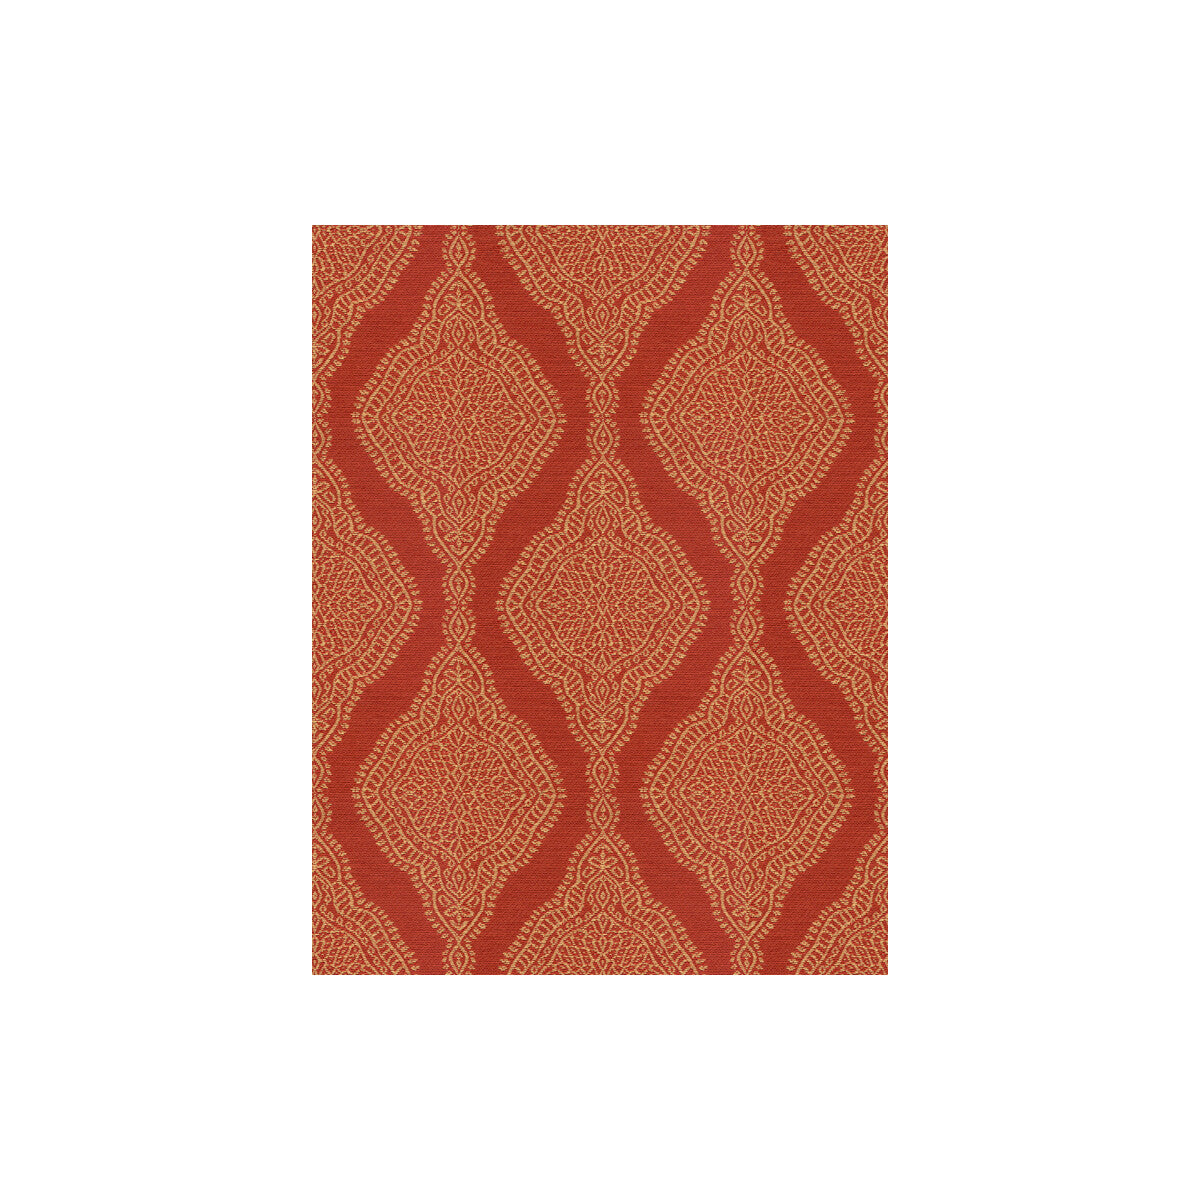 Liliana fabric in ginger color - pattern 32935.24.0 - by Kravet Contract in the Contract Gis collection